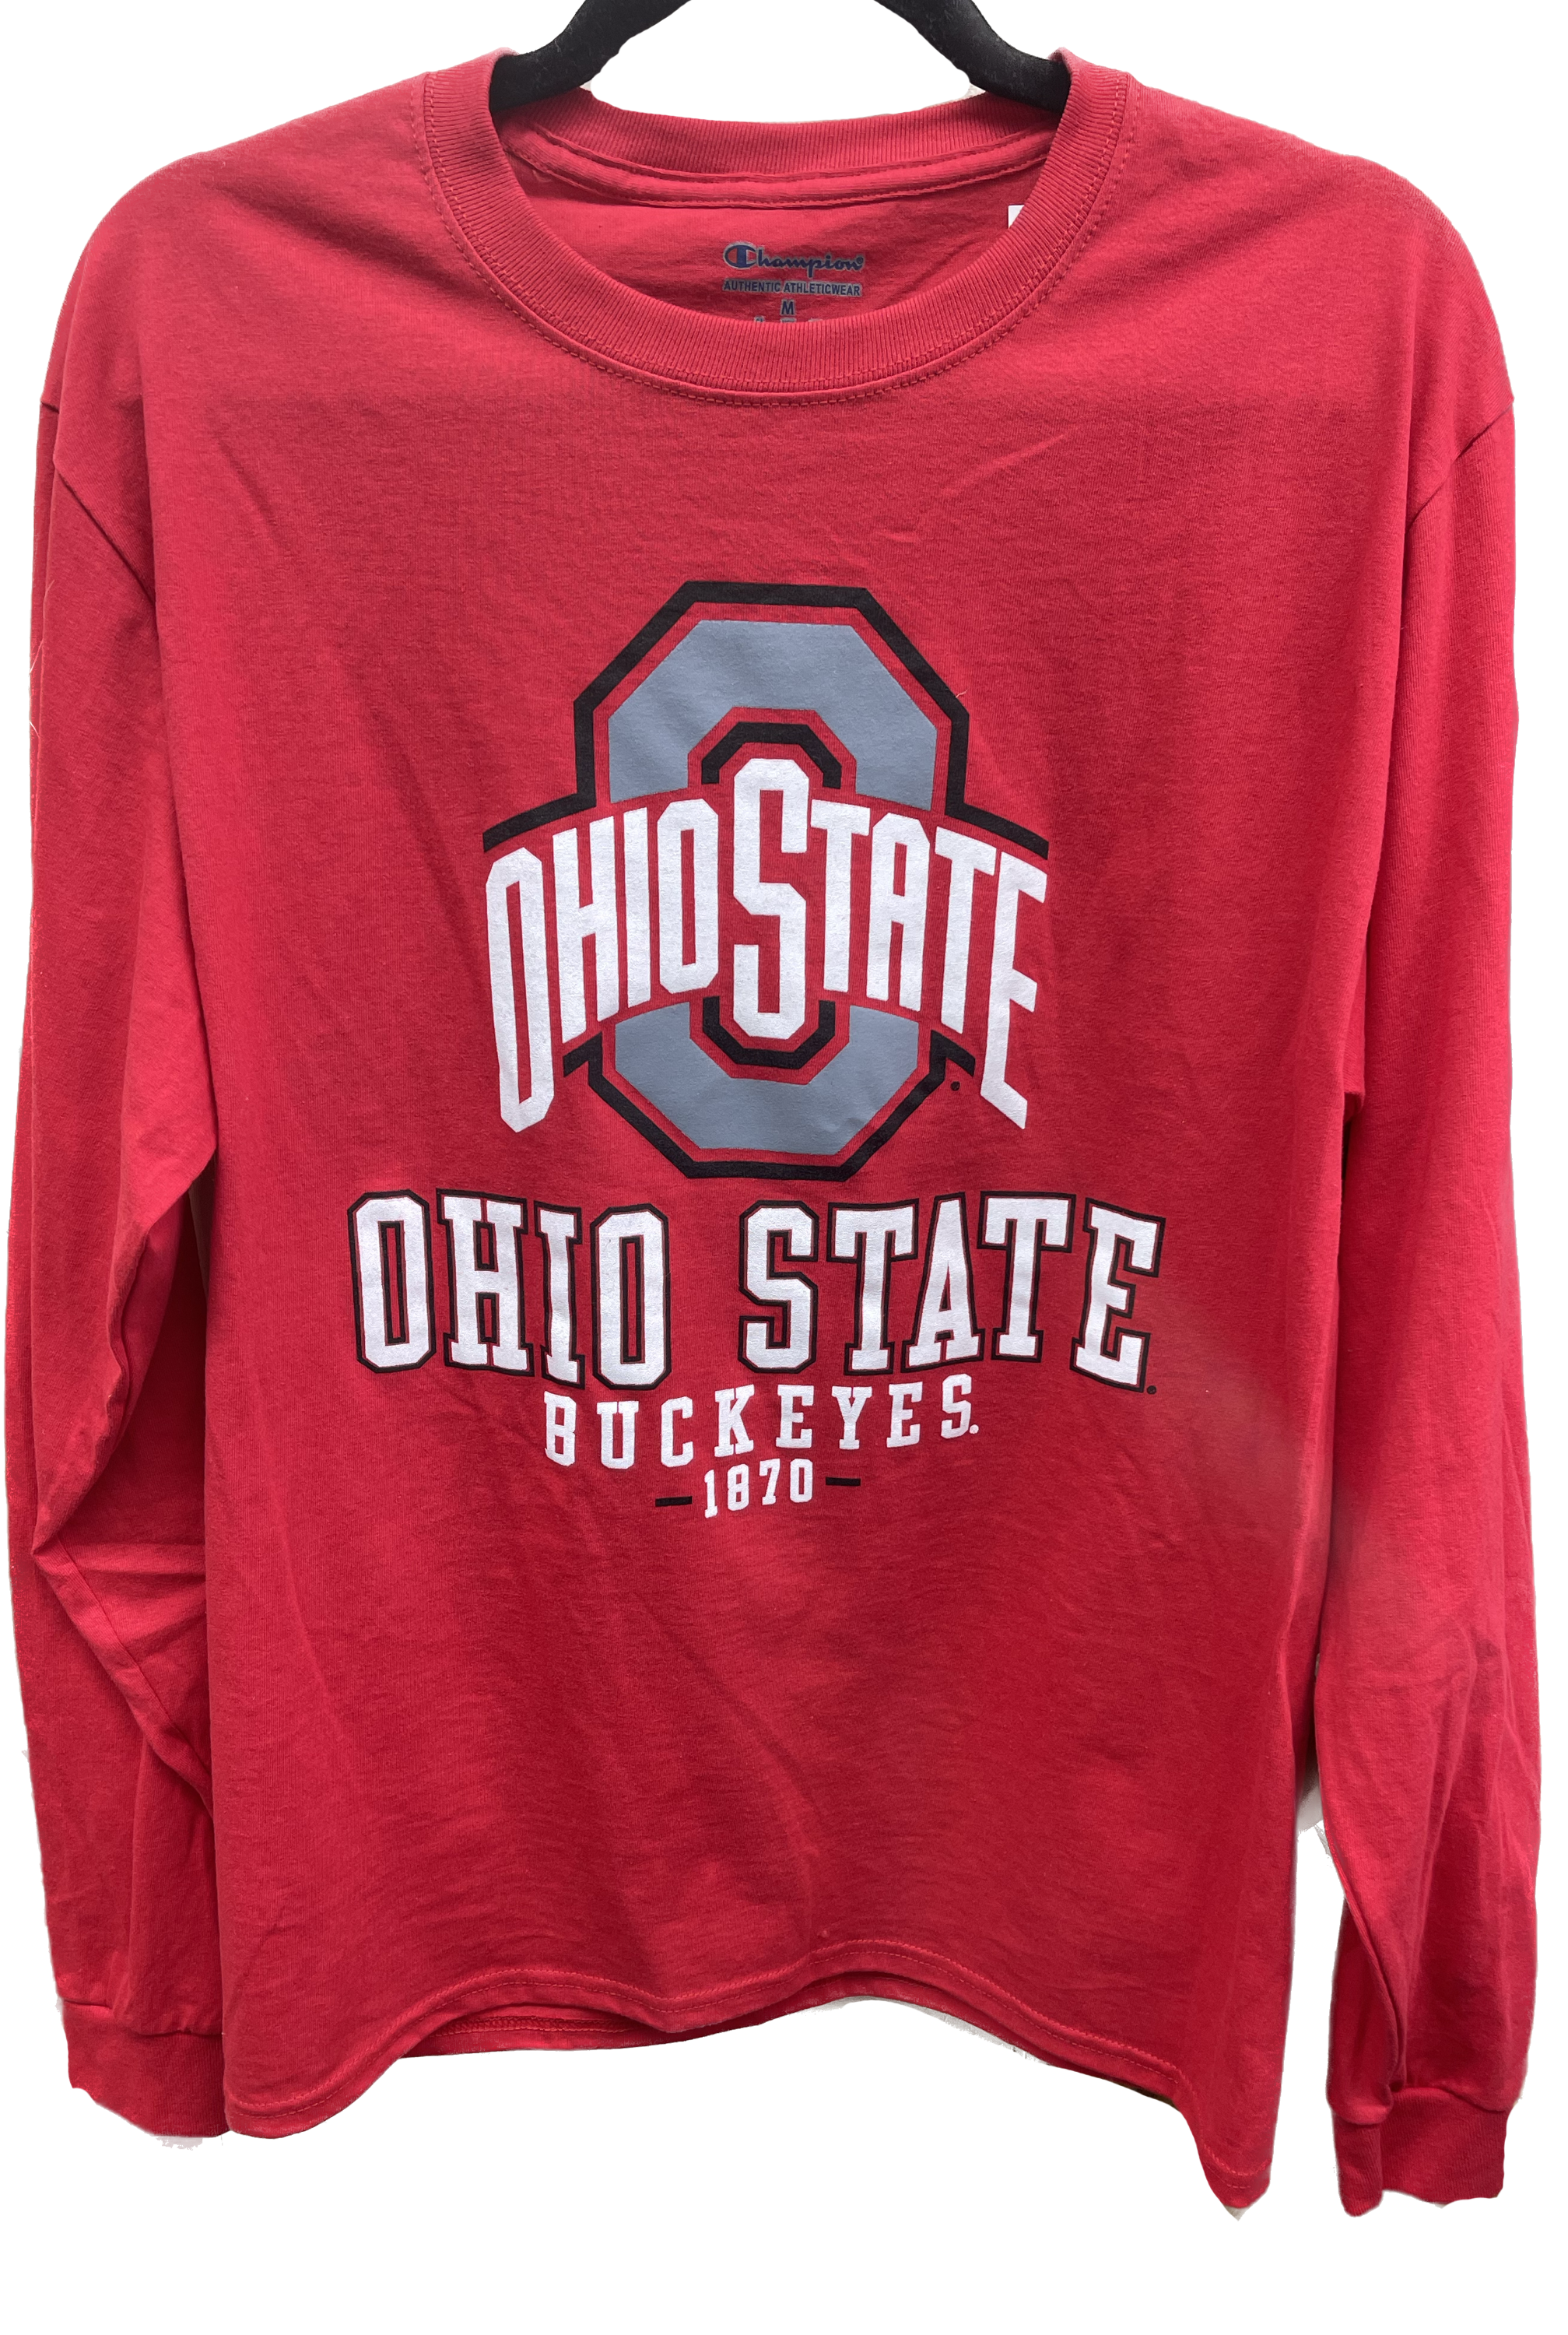  Ohio State University Athletic logo, Ohio State Buckeyes, 1870 long sleeve tee, Champion, high quality athletic wear, authentic, Officially Licensed Merchandise, The Ohio State University Buckeyes, NCAA.